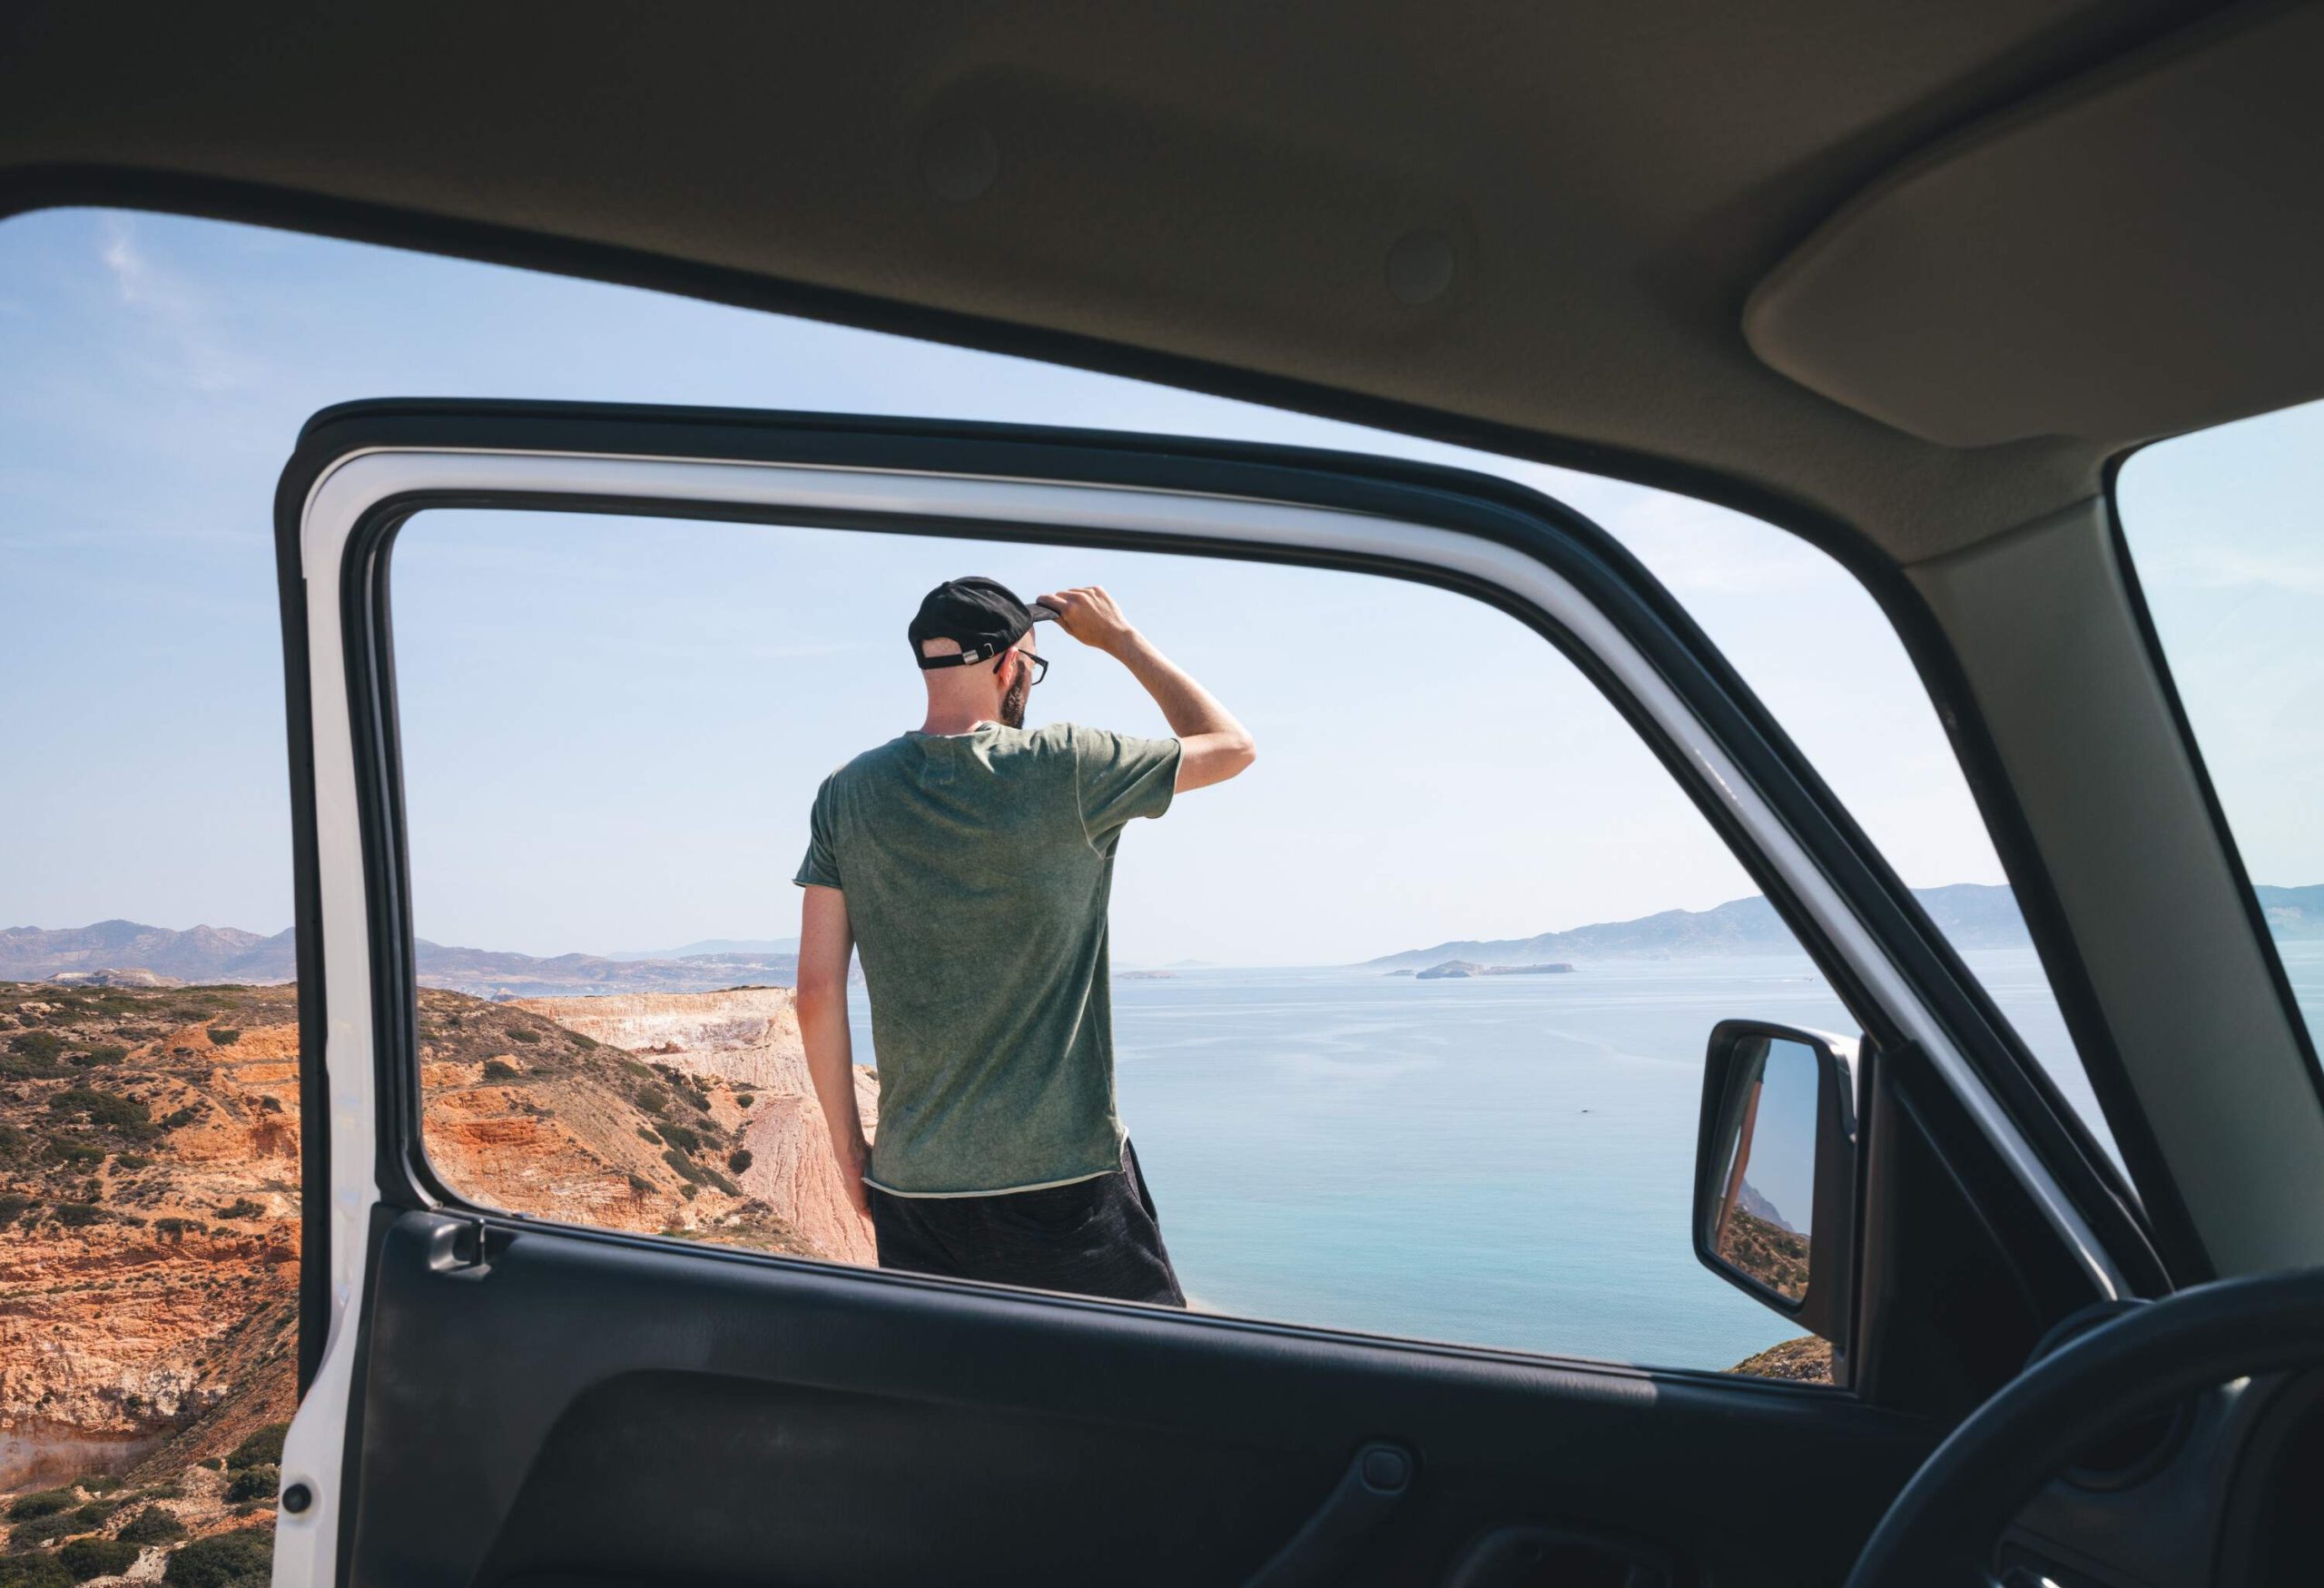 A man standing outside of his parked car with the door open, looking out over the landscape.